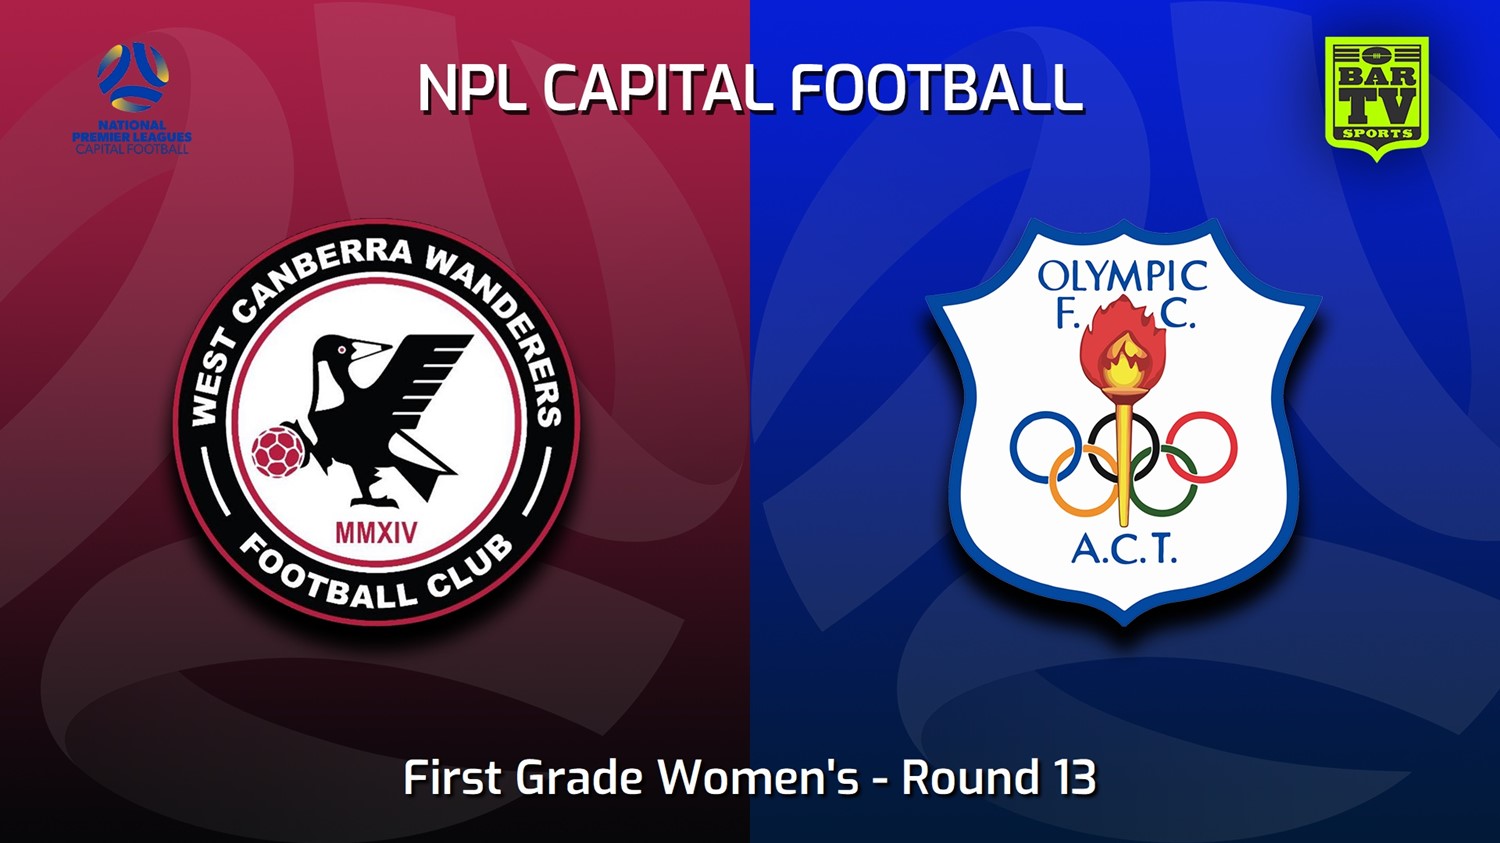 230702-Capital Womens Round 13 - West Canberra Wanderers FC (women) v Canberra Olympic FC (women) Minigame Slate Image